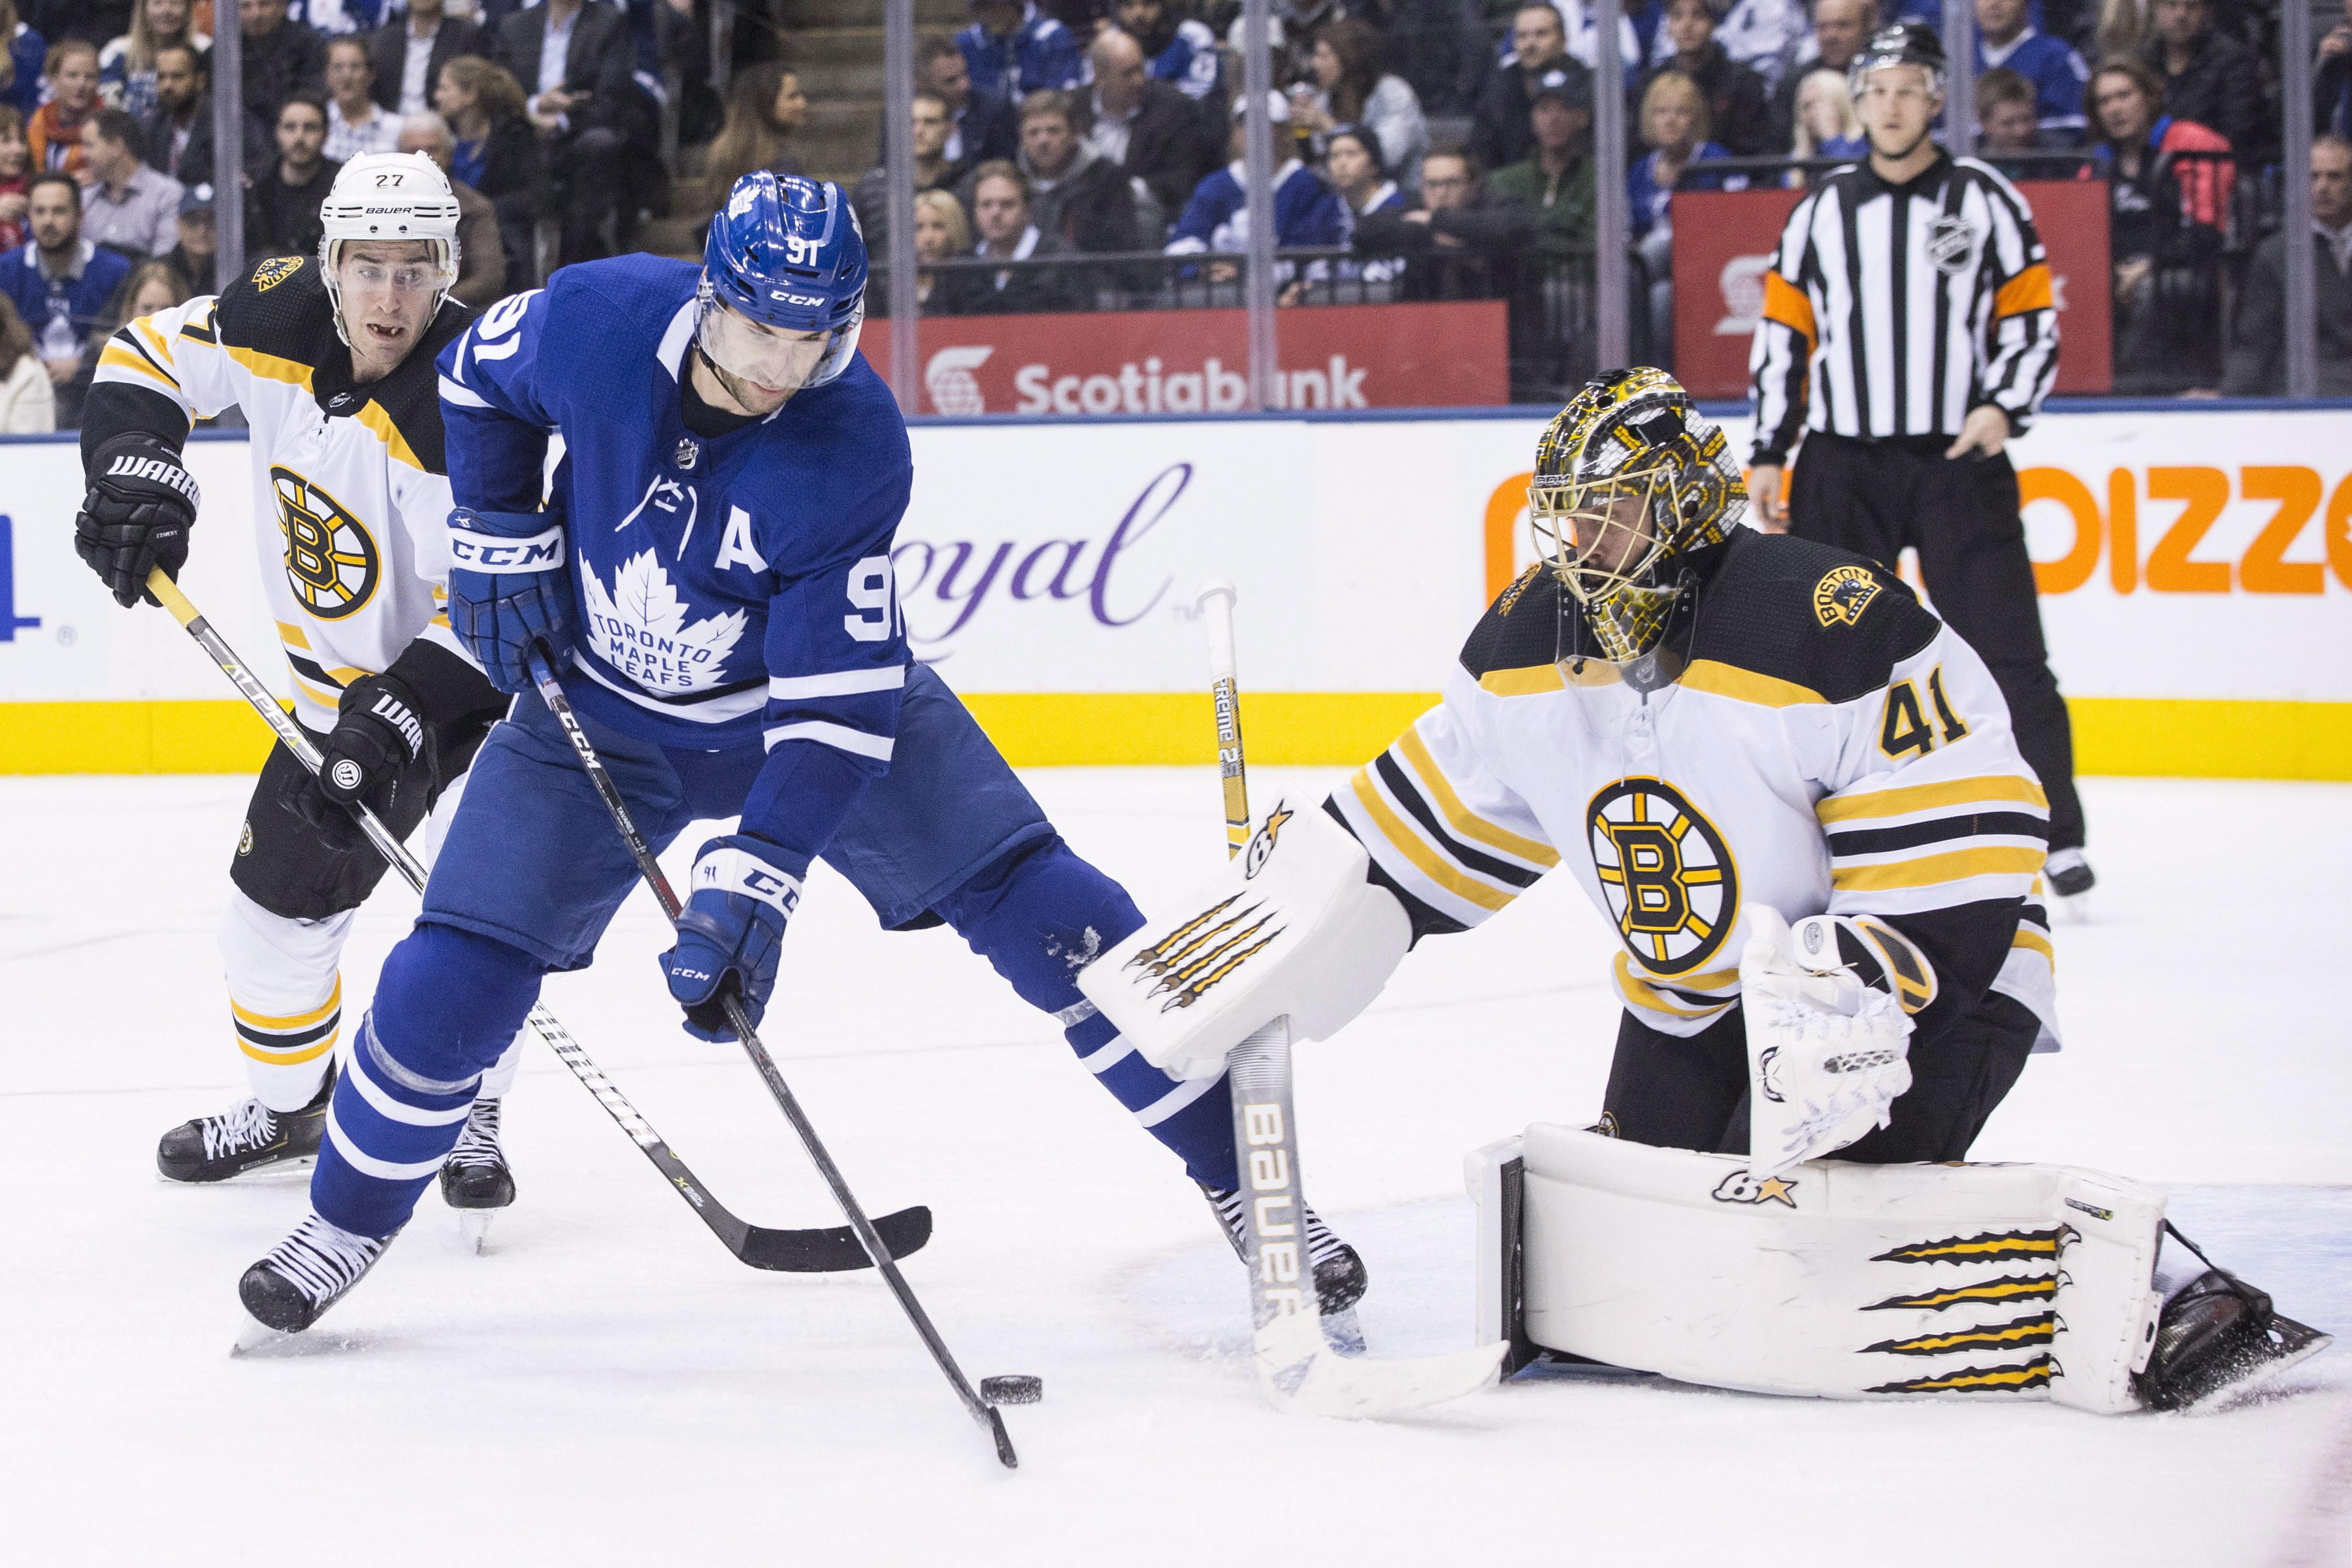 Leafs down Sharks as Marner ties franchise record with 18-game